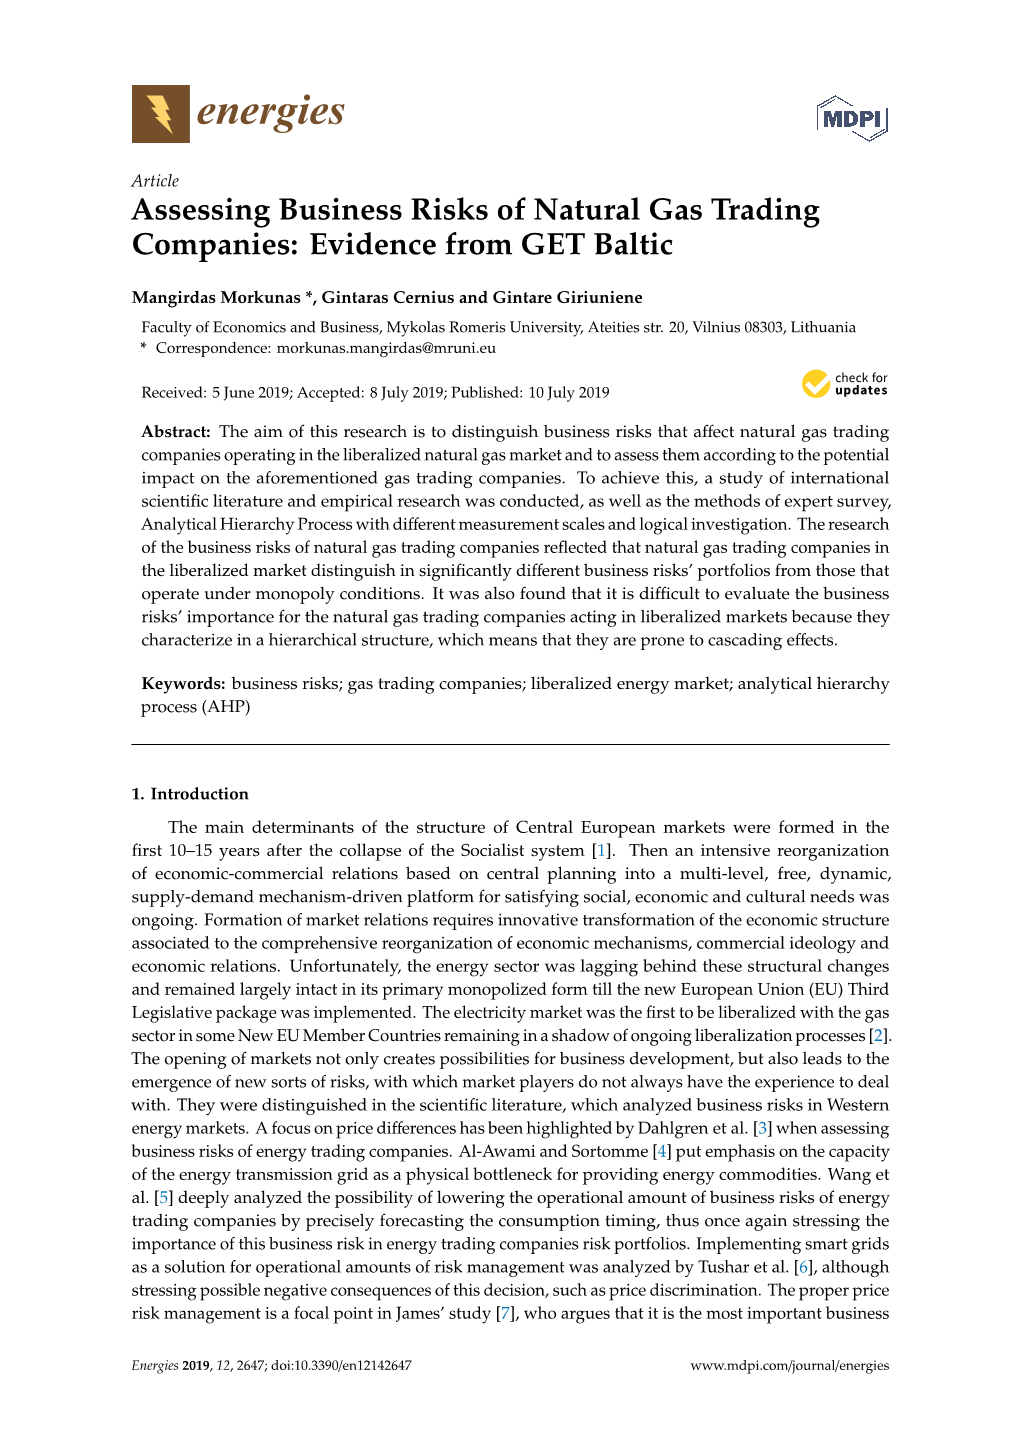 Assessing Business Risks of Natural Gas Trading Companies: Evidence from GET Baltic